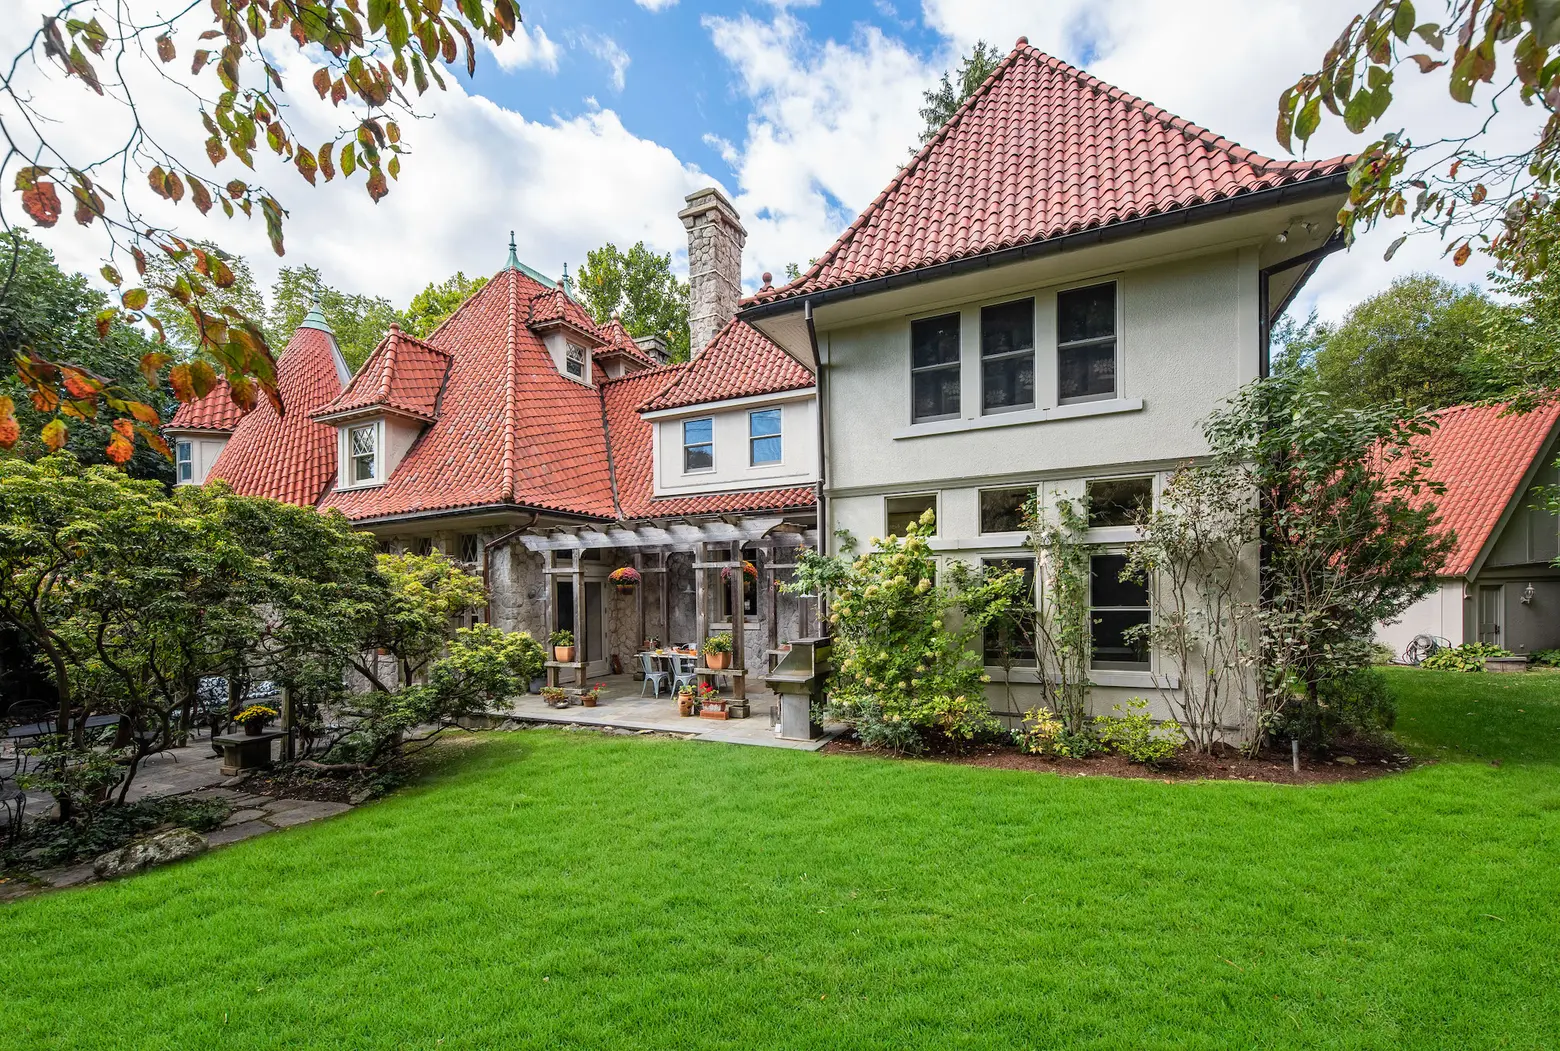 Feel like you’re in the French countryside in this $1.6M Westchester home with a grape arbor